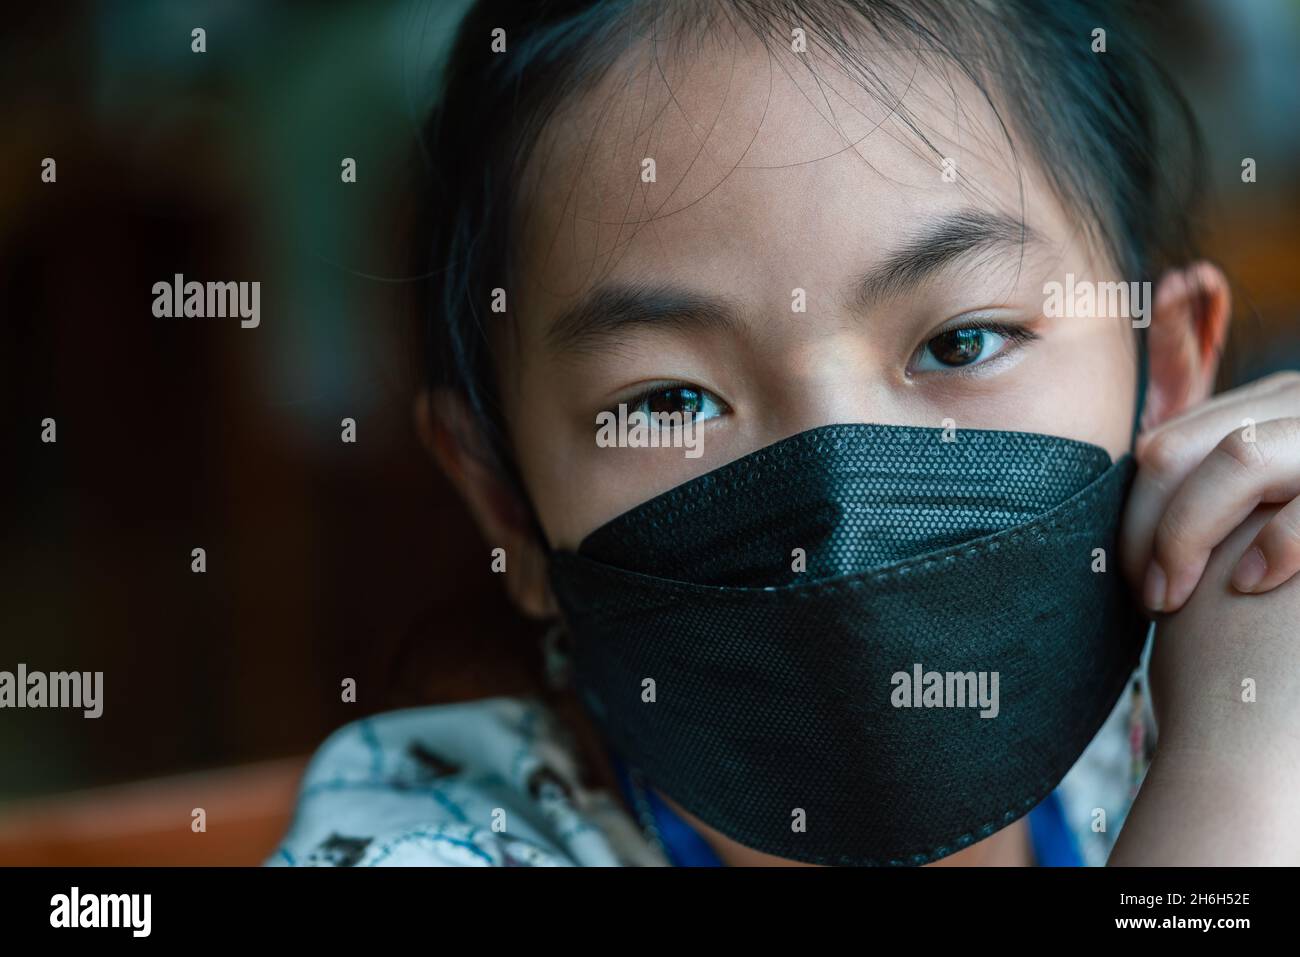 Close-up face of Asian child girl at 8 years old wearing medical black color mark, emotional eyes look at the camera. Stock Photo